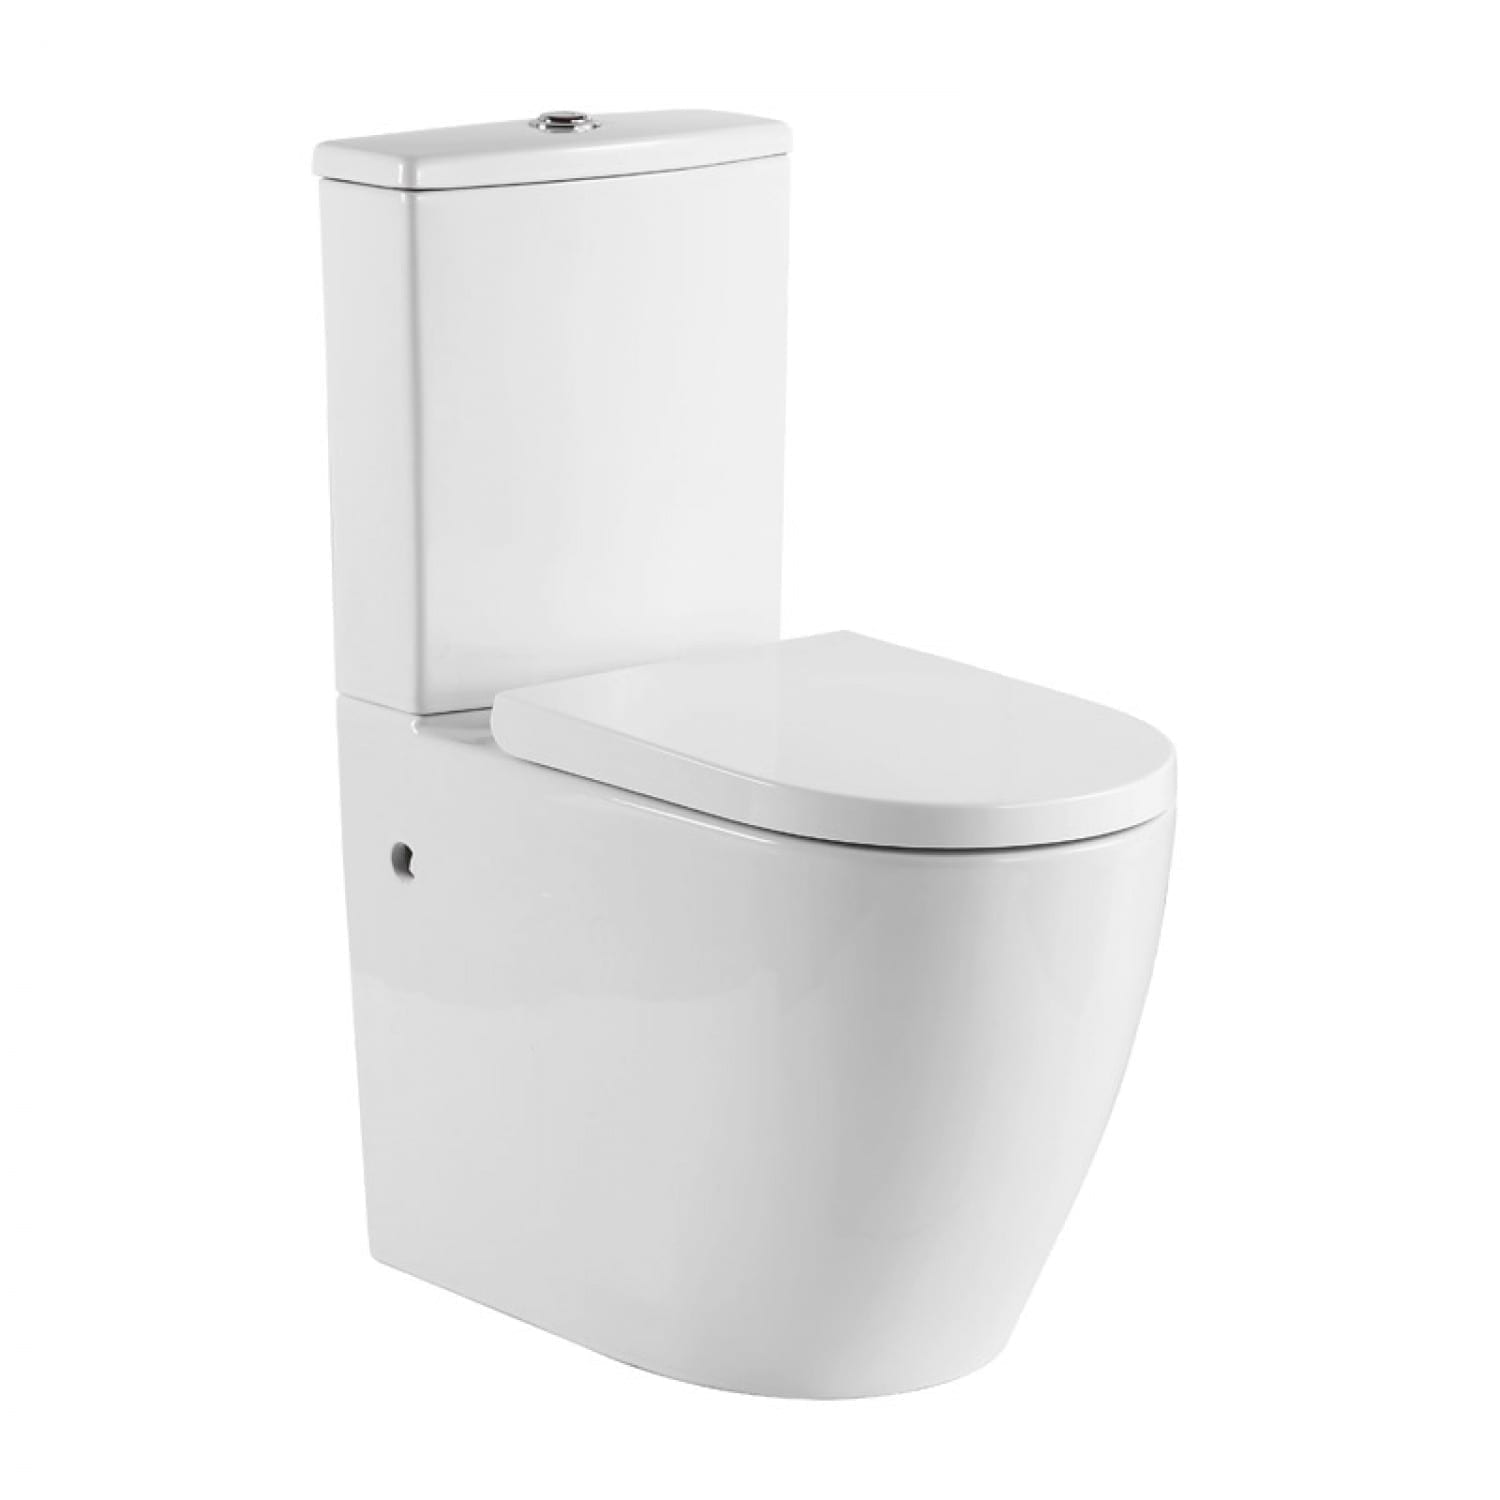 KDK 027 Toilet with Raised Height Pan